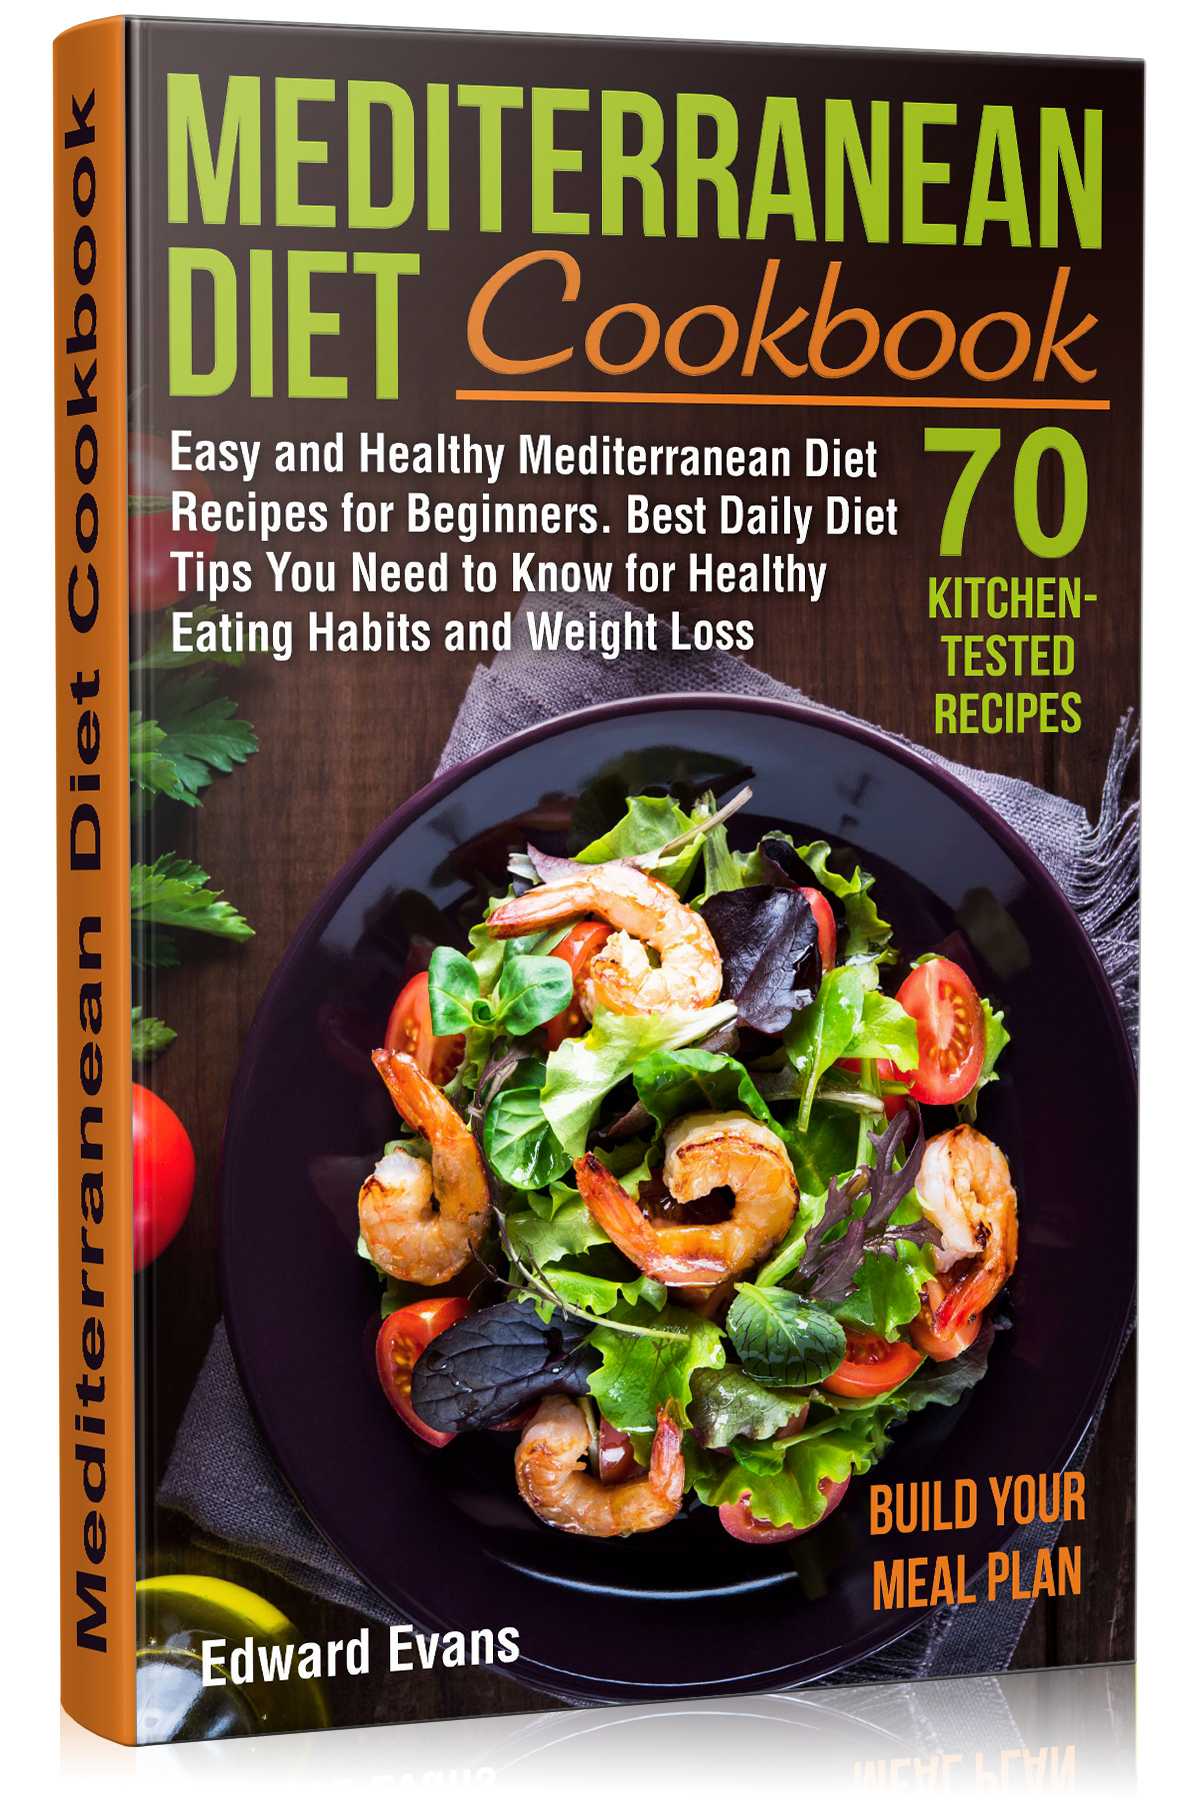 FREE: Mediterranean Diet Cookbook: Easy and Healthy Mediterranean Diet Recipes for Beginners. Best Daily Diet Tips You Need to Know for Healthy Eating Habits and Weight Loss (Mediterranean Diet Lifestyle) by Edward Evans